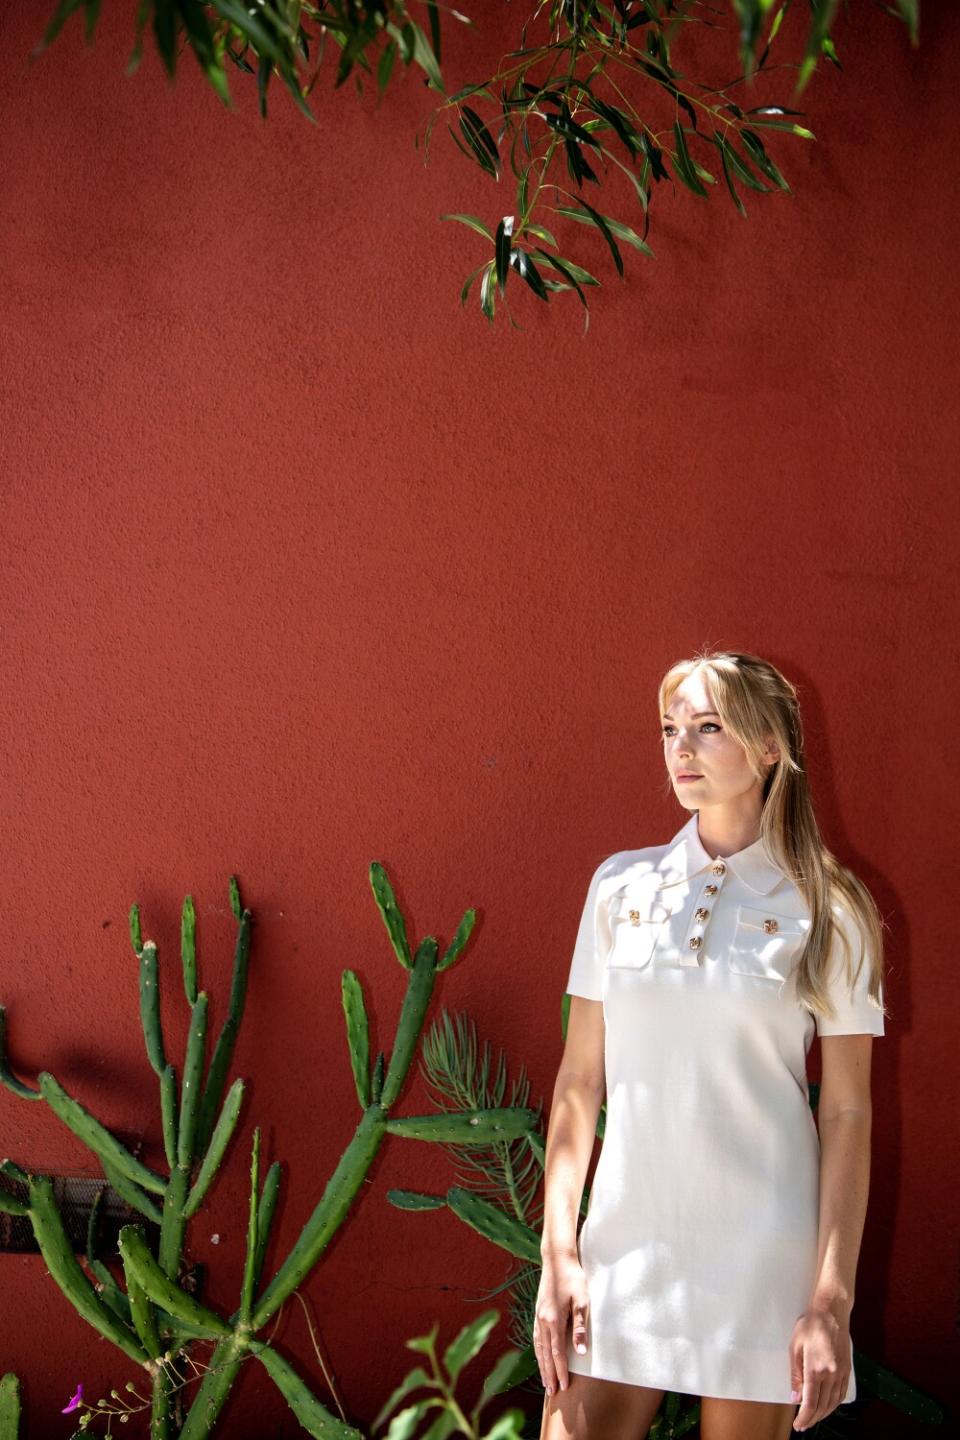 A blond woman in a white dress stands in front of a red wall, a cactus at her side.